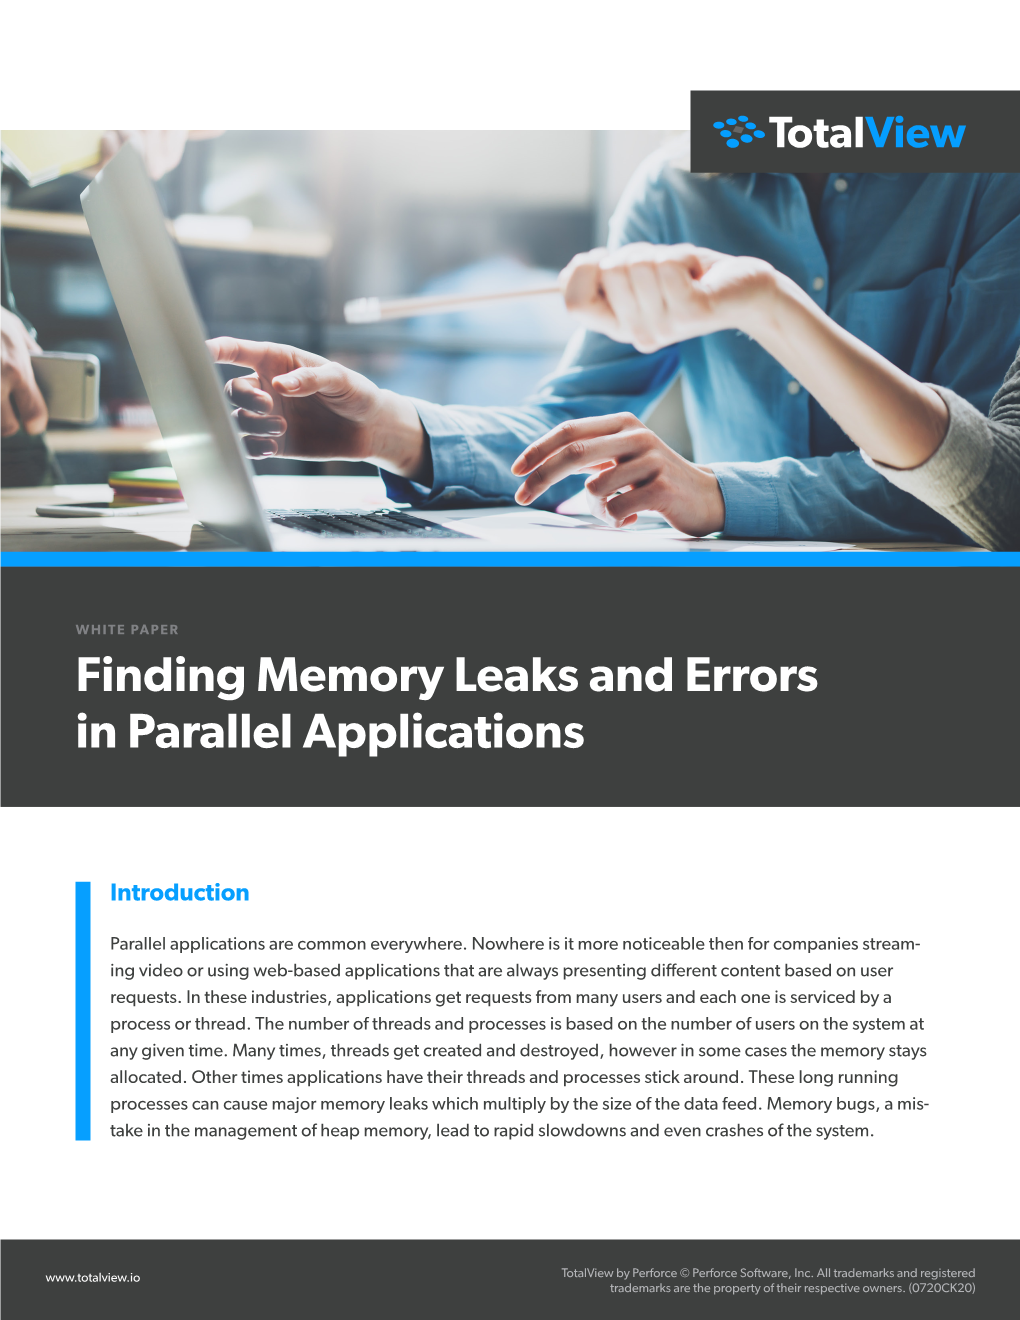 Finding Memory Leaks and Errors in Parallel Applications